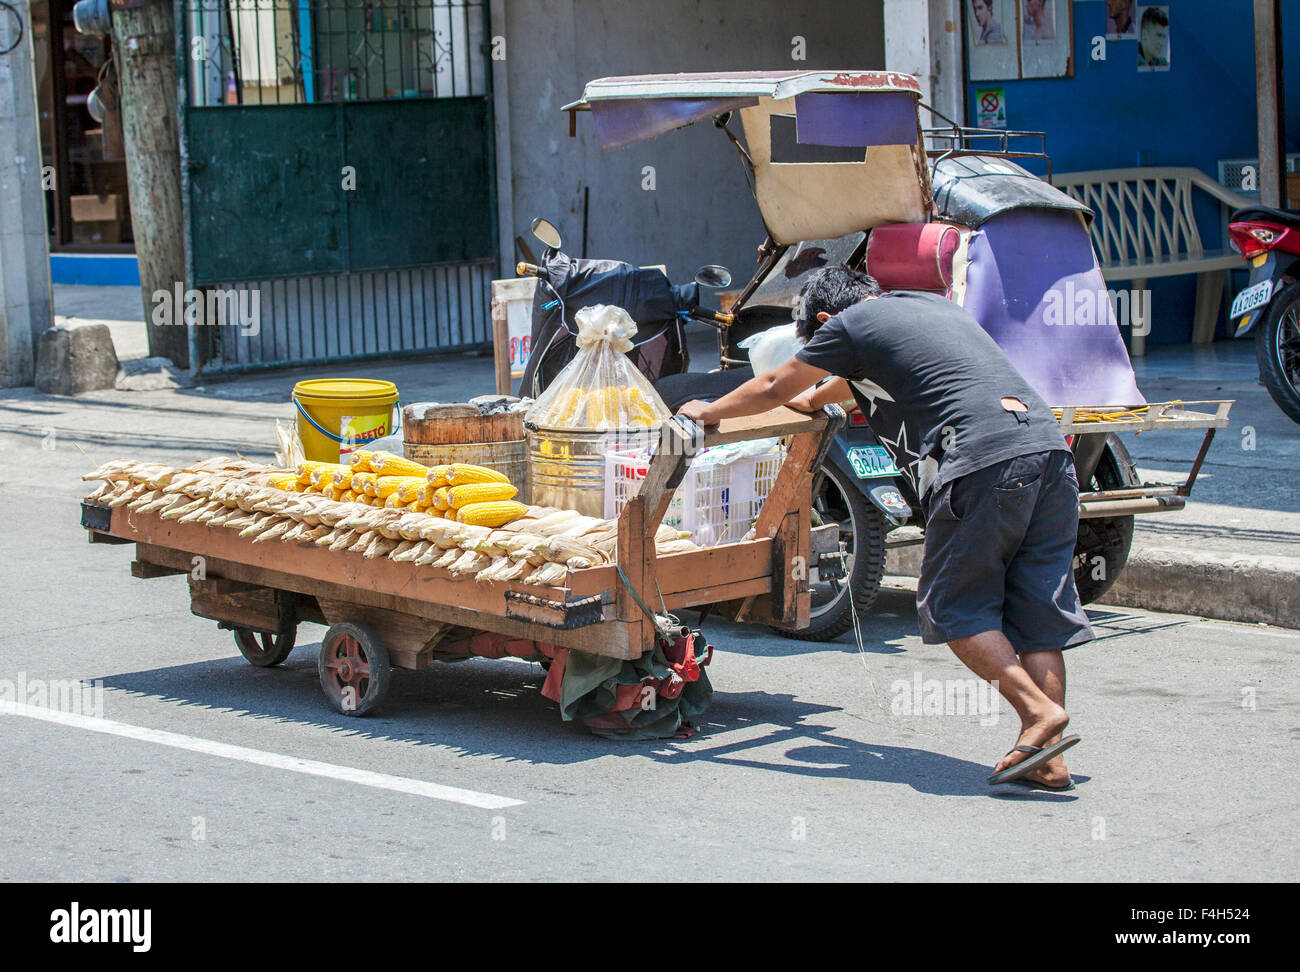 A Filipino man pushes a flat cart along a city road. It's loaded with cooked corn that he sells to people on the street. Stock Photo